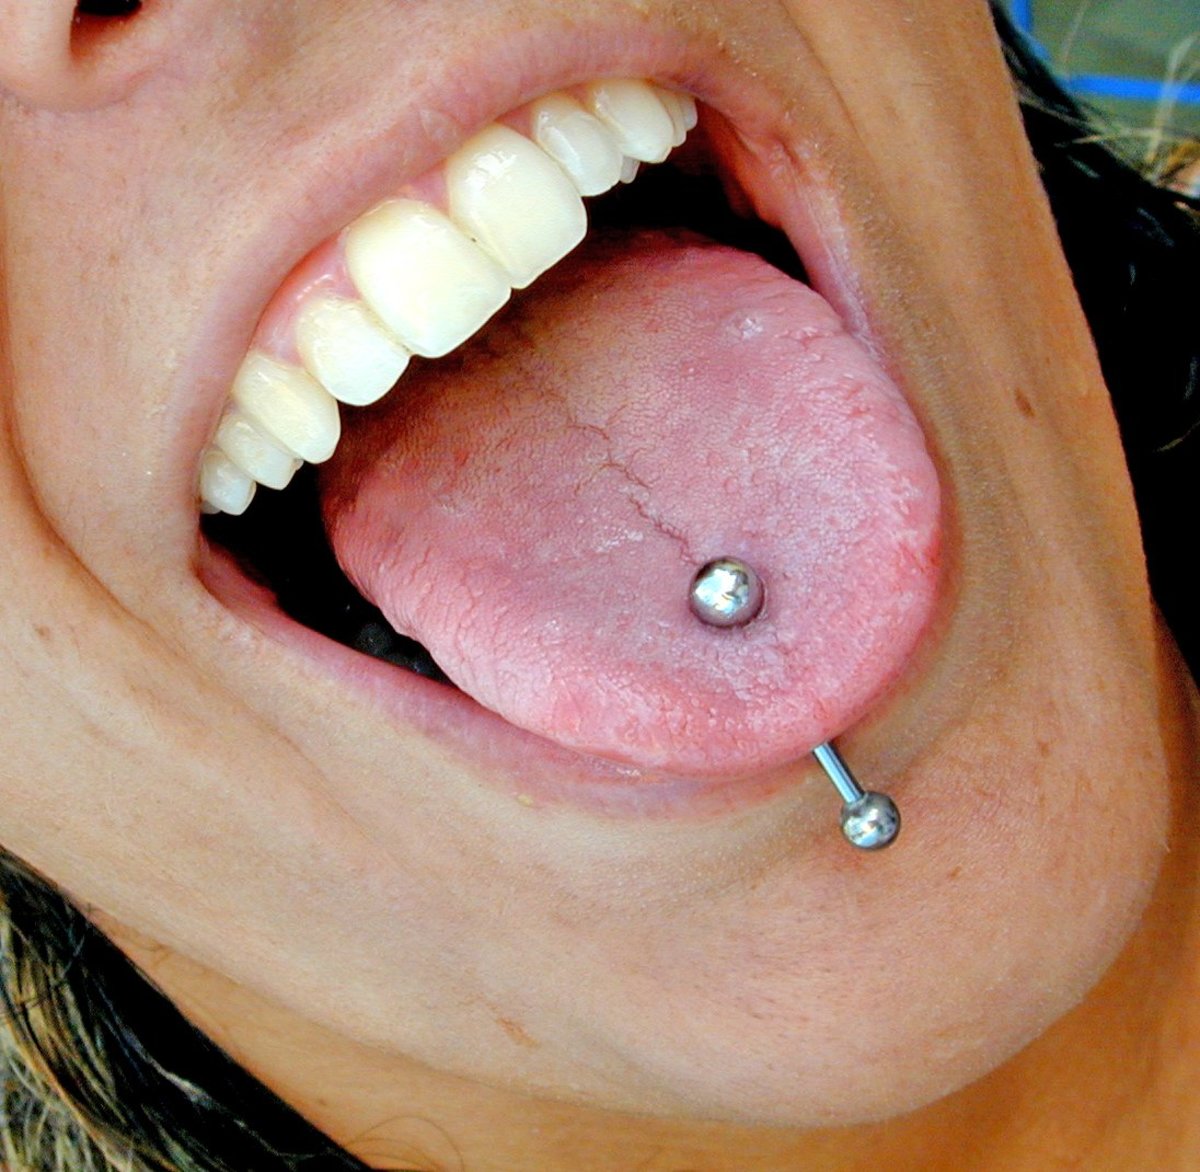 Where on Your Body Should You Get a Piercing?